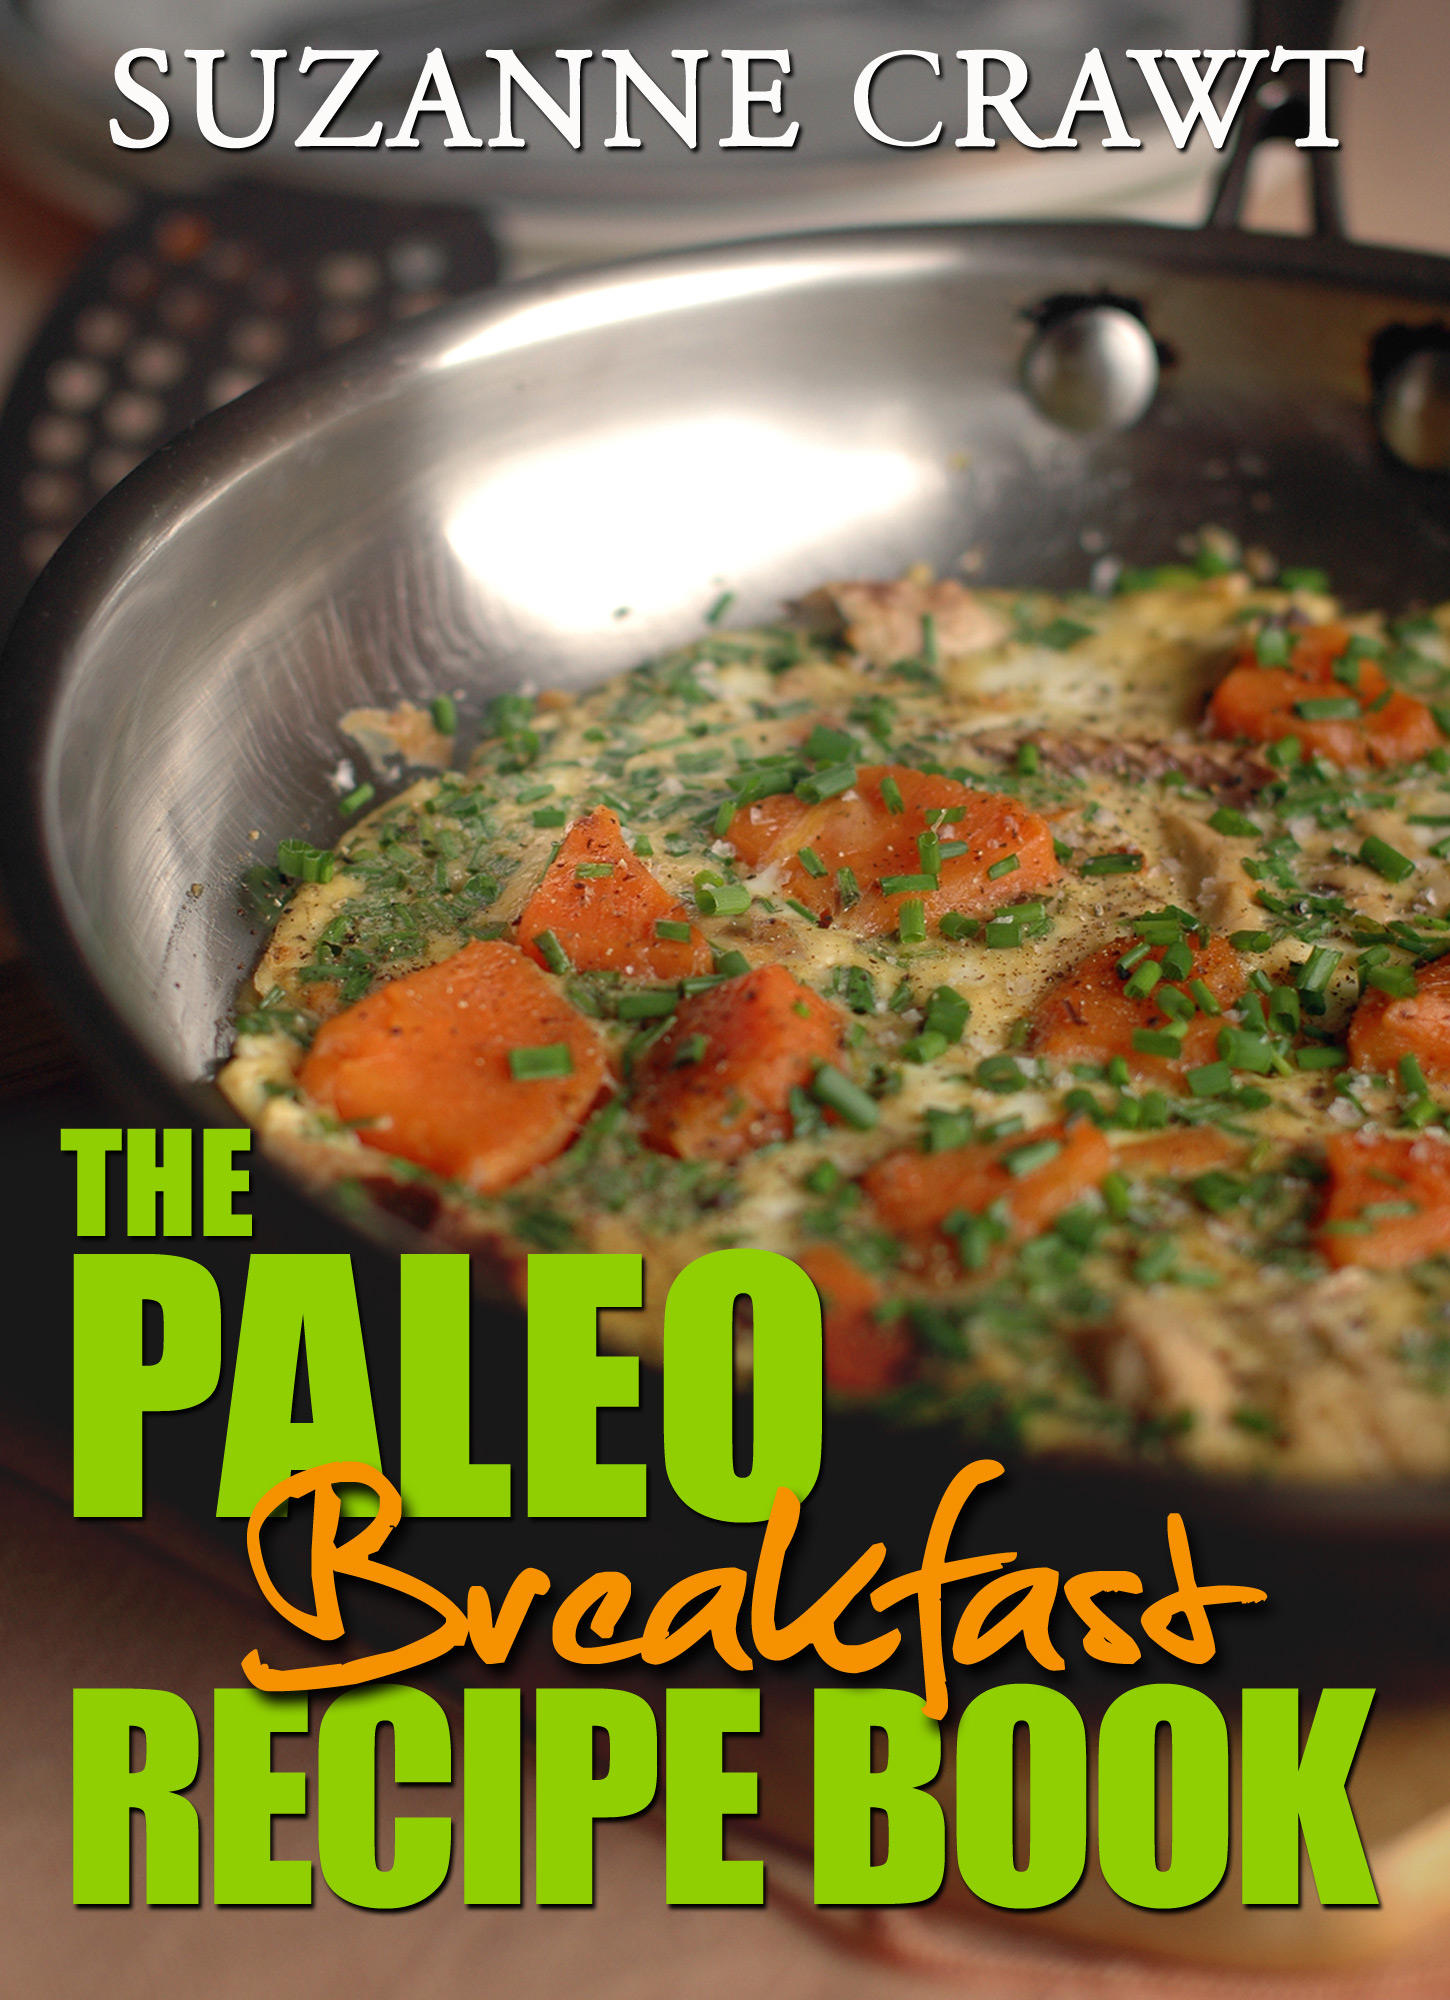 You are here: Home / Buy My Books / Paleo Breakfast Recipe Book